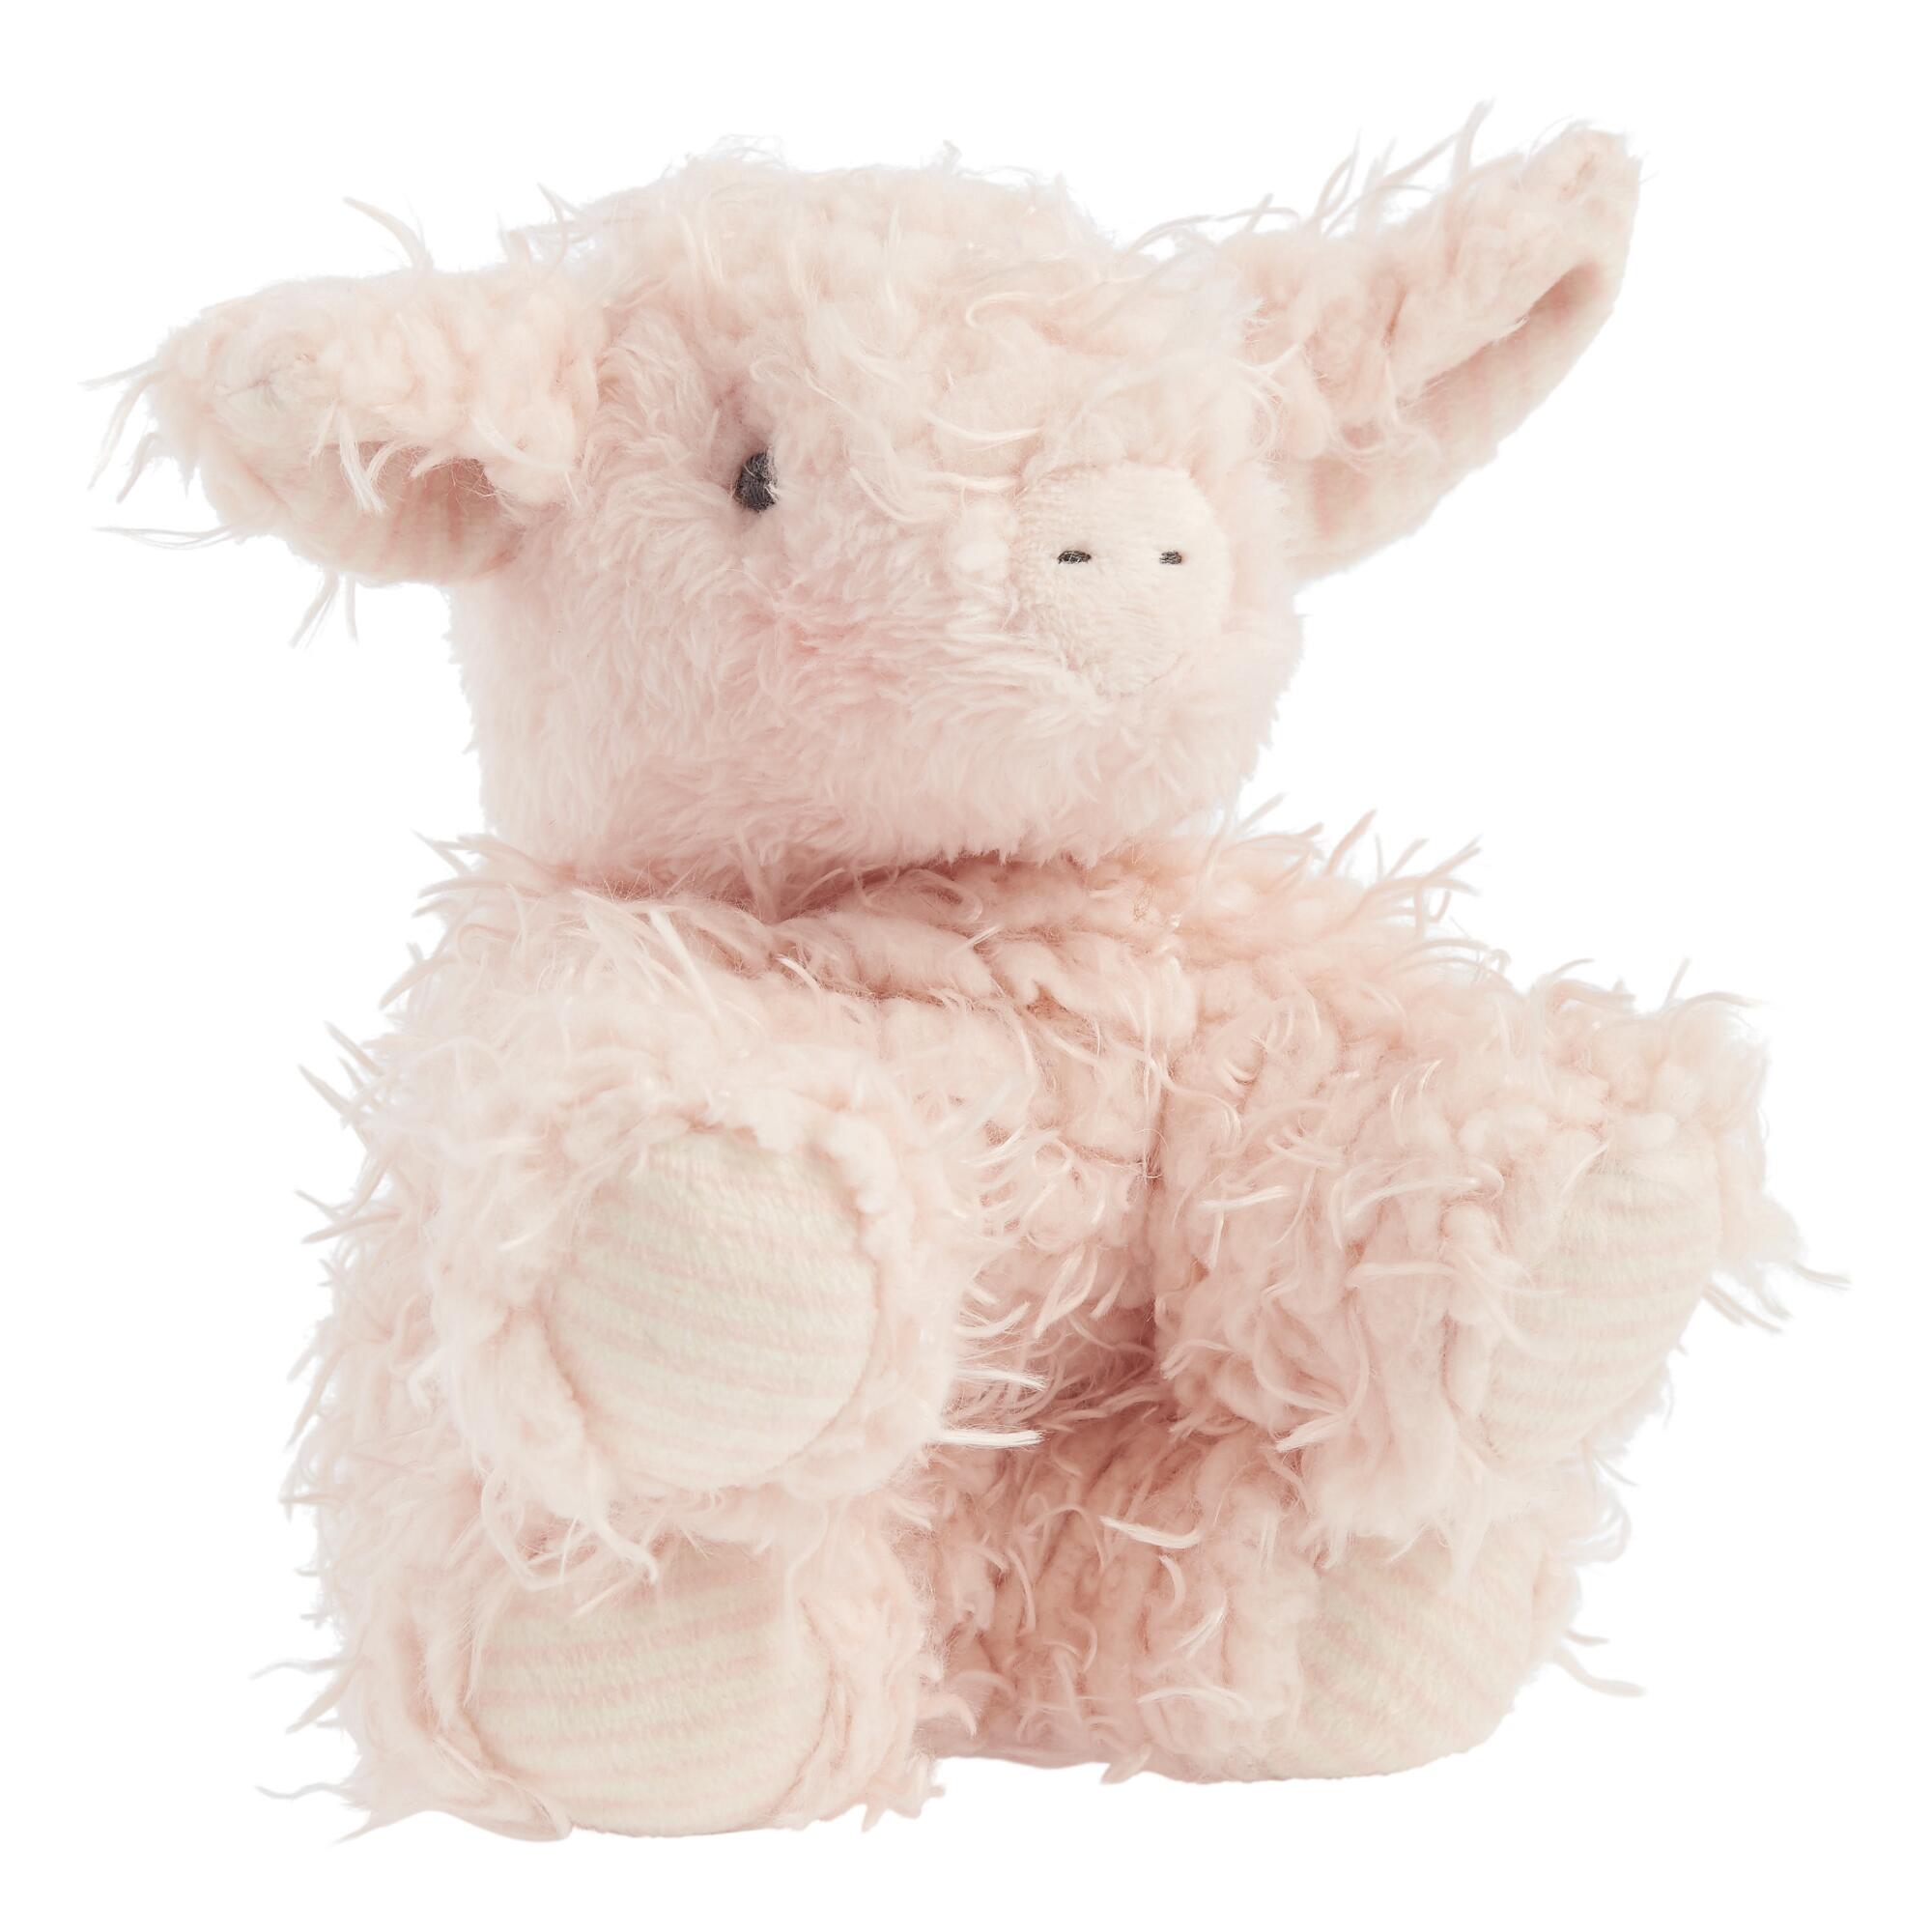 Bunnies by the Bay Spoink Plush Stuffed Piglet by World Market